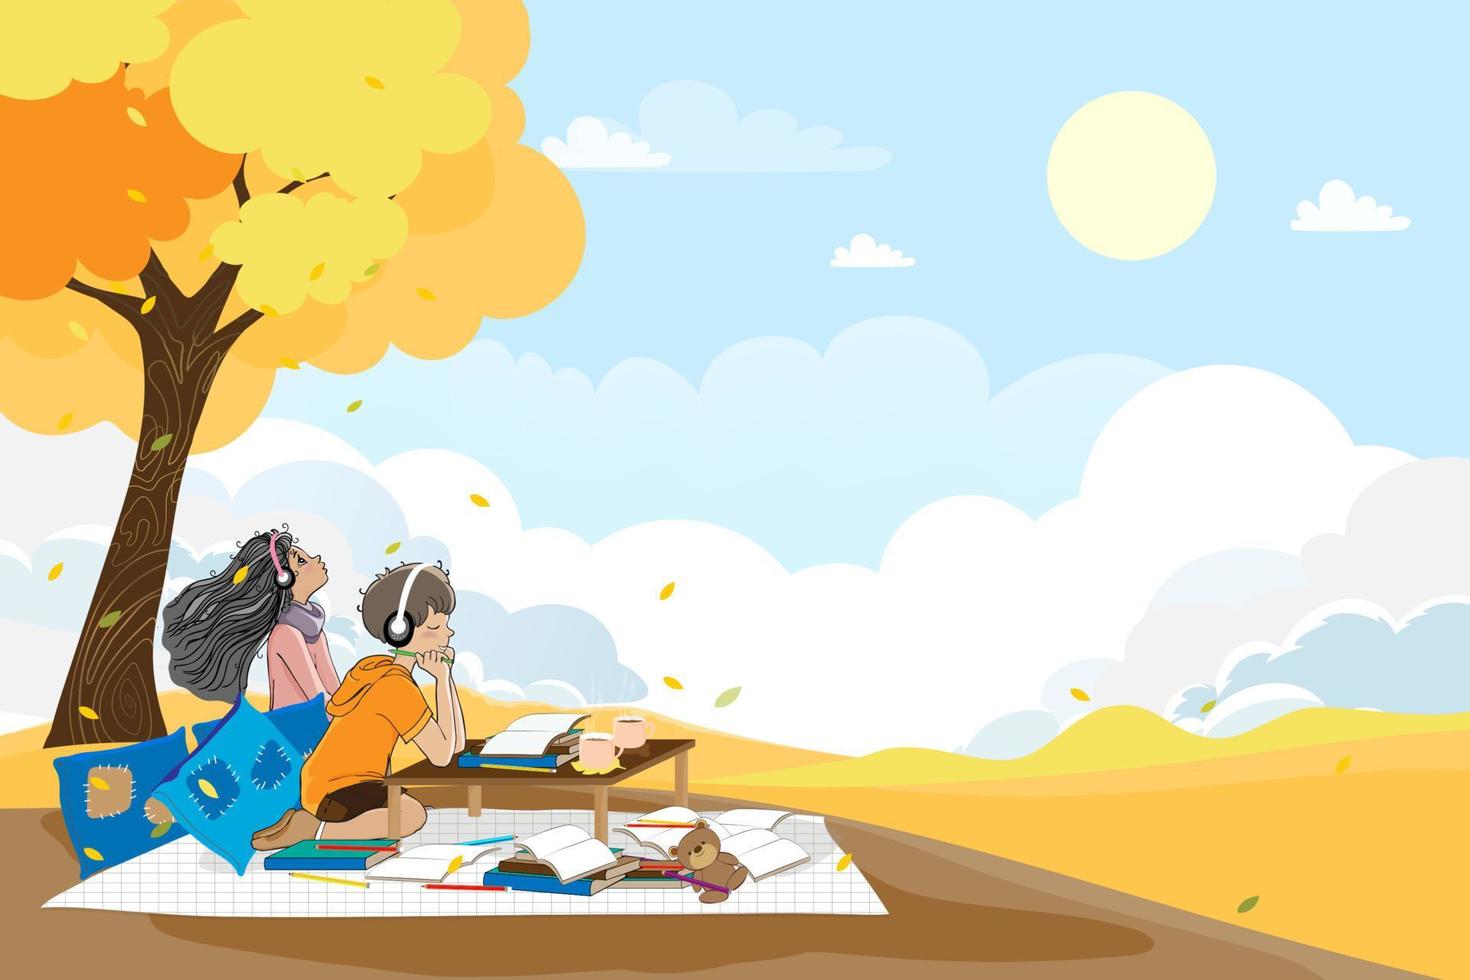 Cute cartoon Schoolboy wearing headphones listening to music while doing school homework under the tree. Vector of young girl looking up to sky with deep in thoughts, Back to school concept